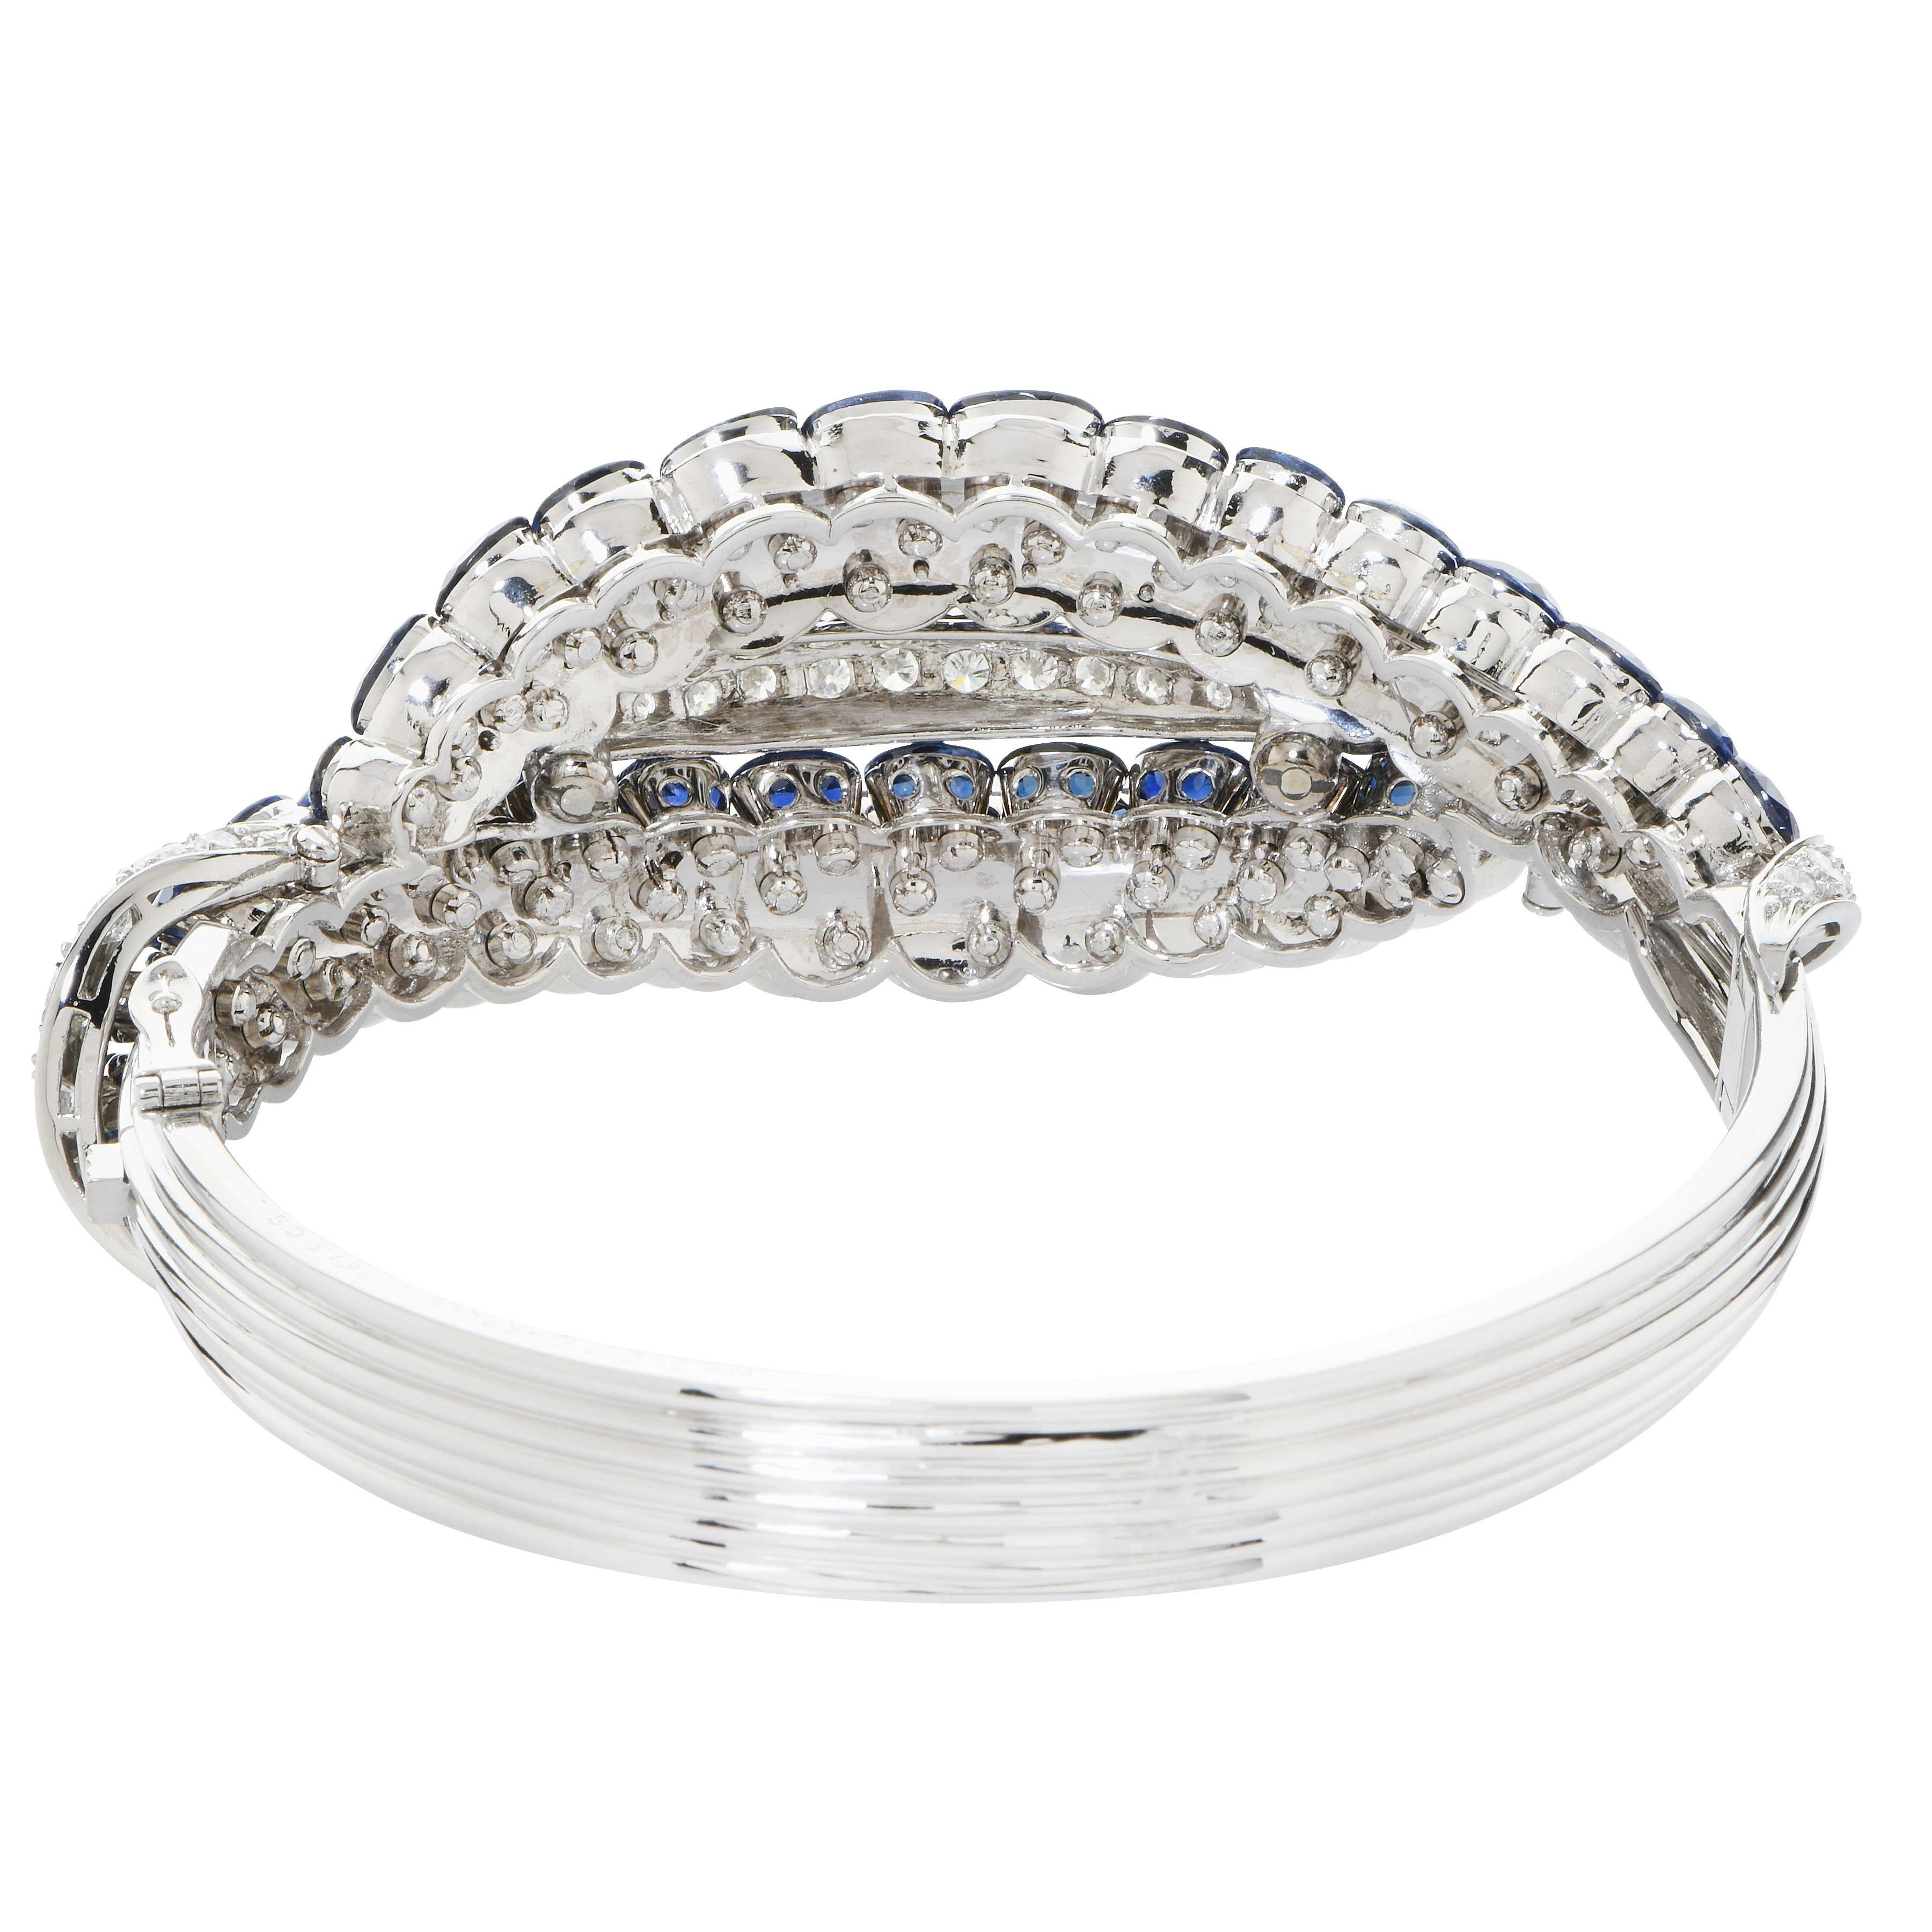 Important Van Cleef & Arpels Sapphire and Diamond Bangle In Excellent Condition For Sale In Bay Harbor Islands, FL